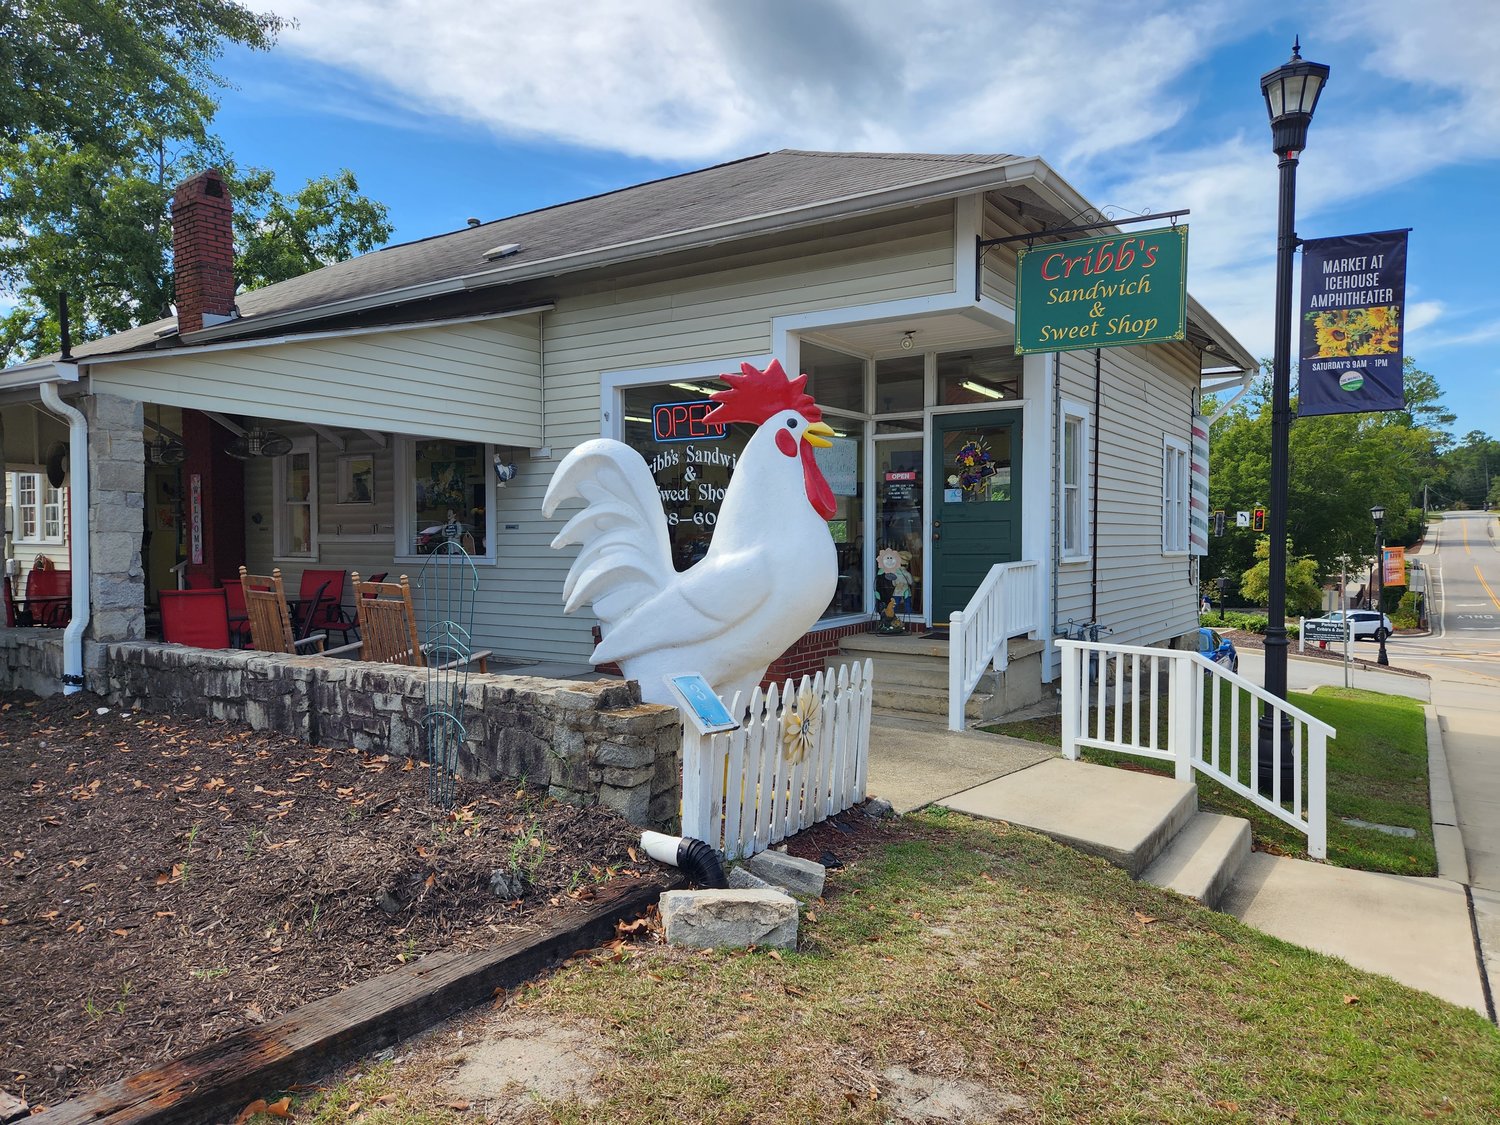 A rooster sculpture identifies Cribb’s Sandwich and Sweet Shop to drivers headed down South Church Street.